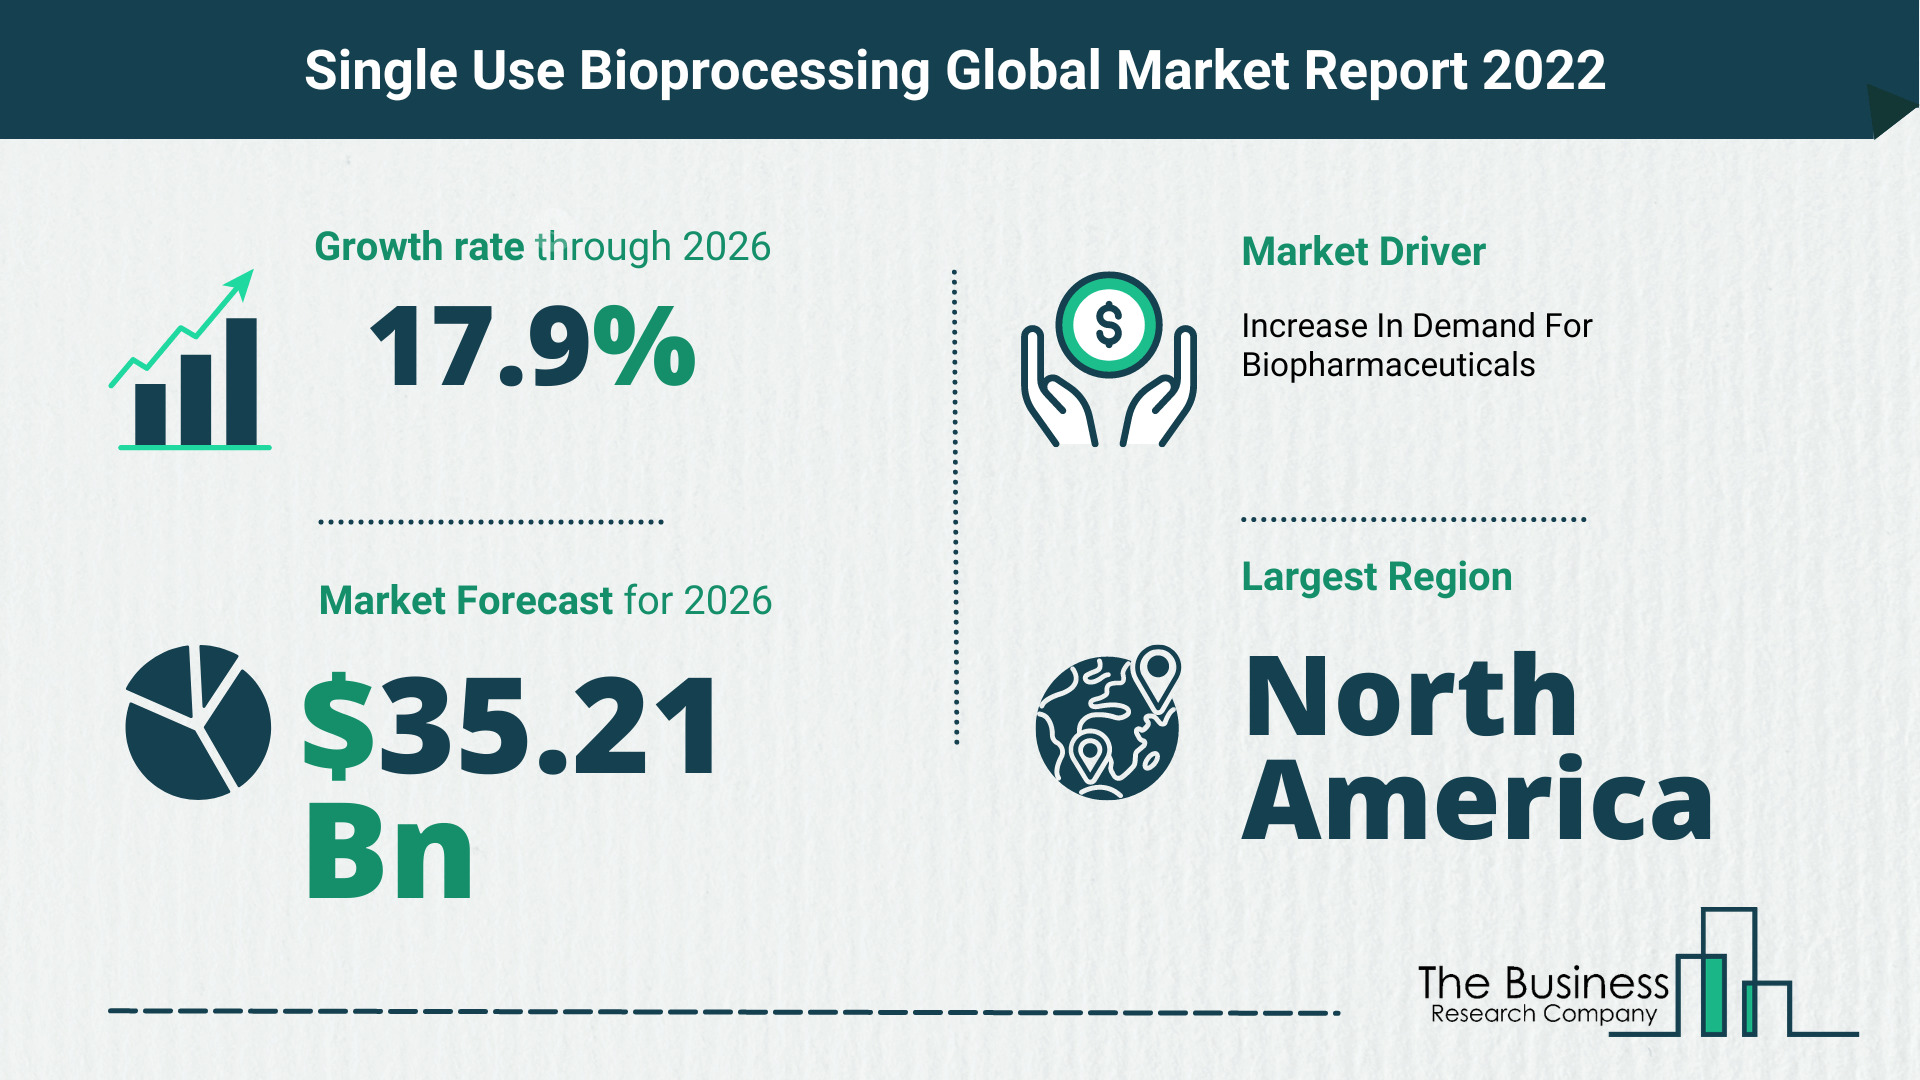 Latest Single Use Bioprocessing Market Growth Study 2022-2026 By The Business Research Company